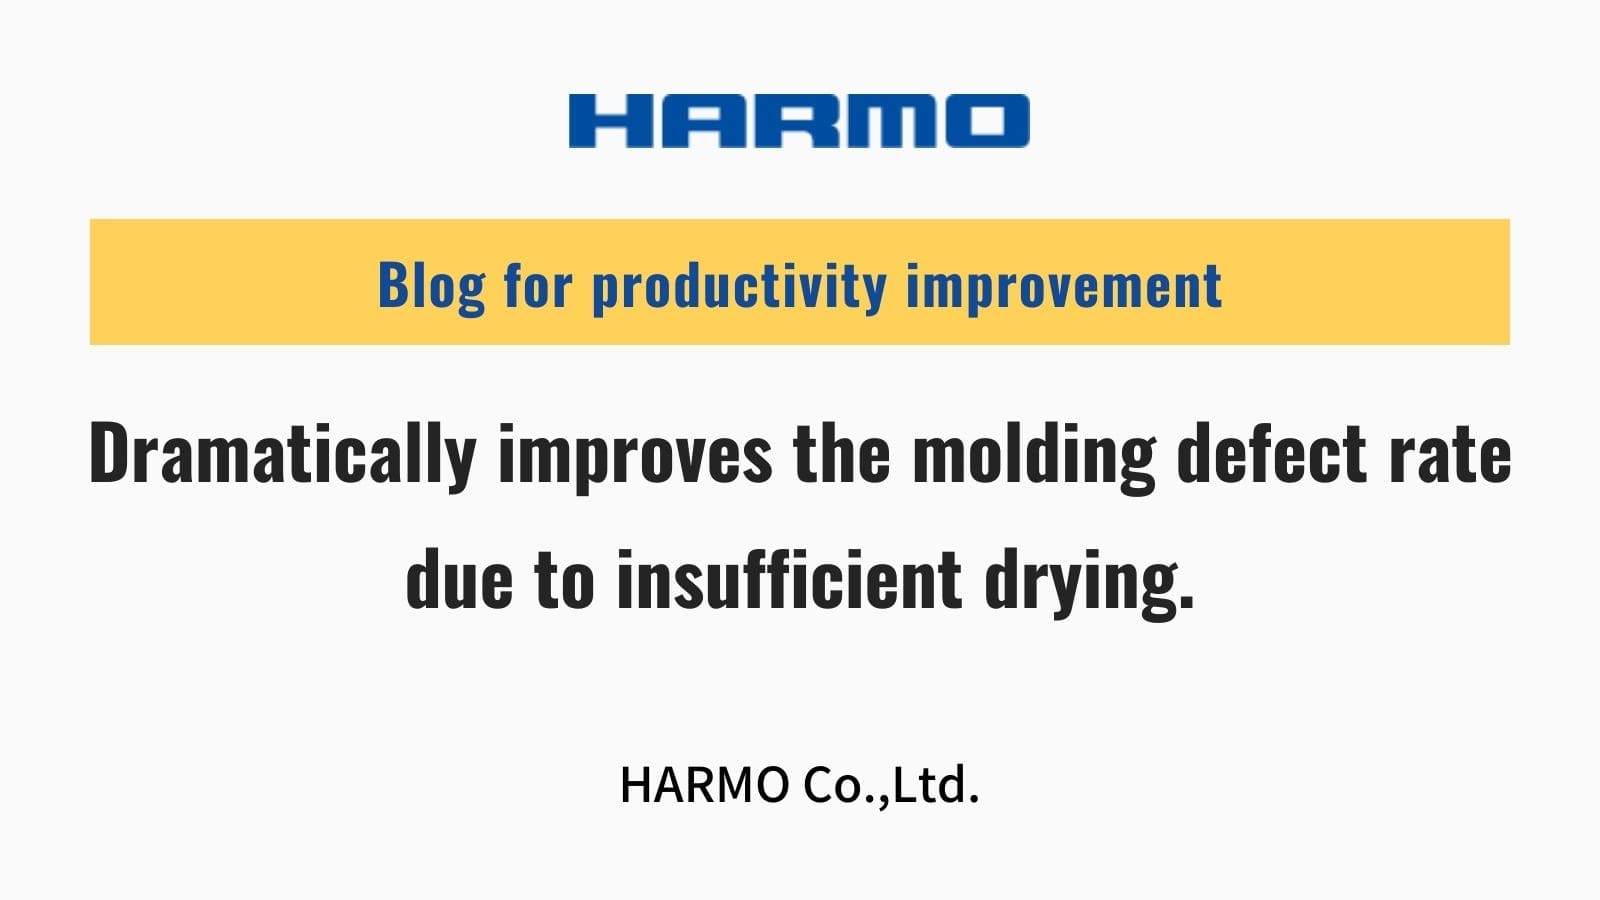 Dramatically improves the molding defect rate due to insufficient drying.